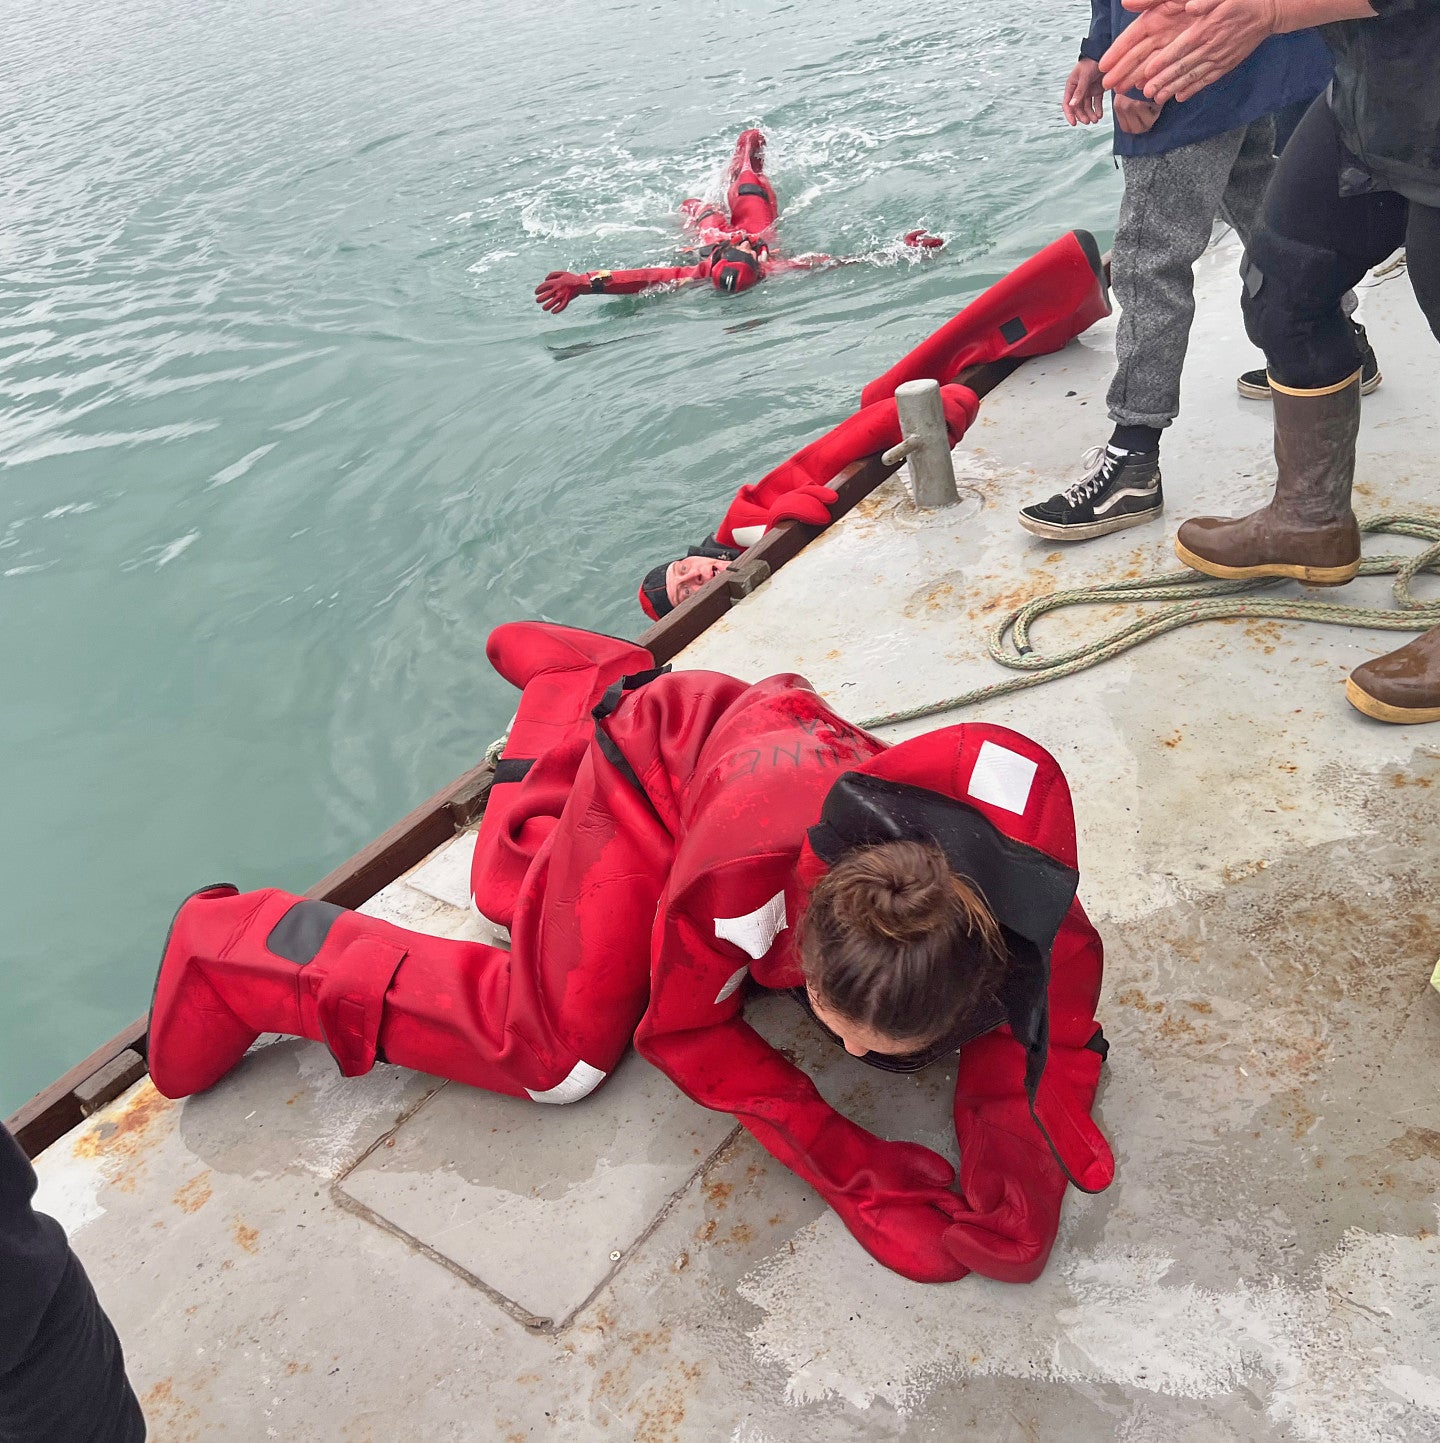 Charlie Boiler climbs out of the water wearing a red survival suit